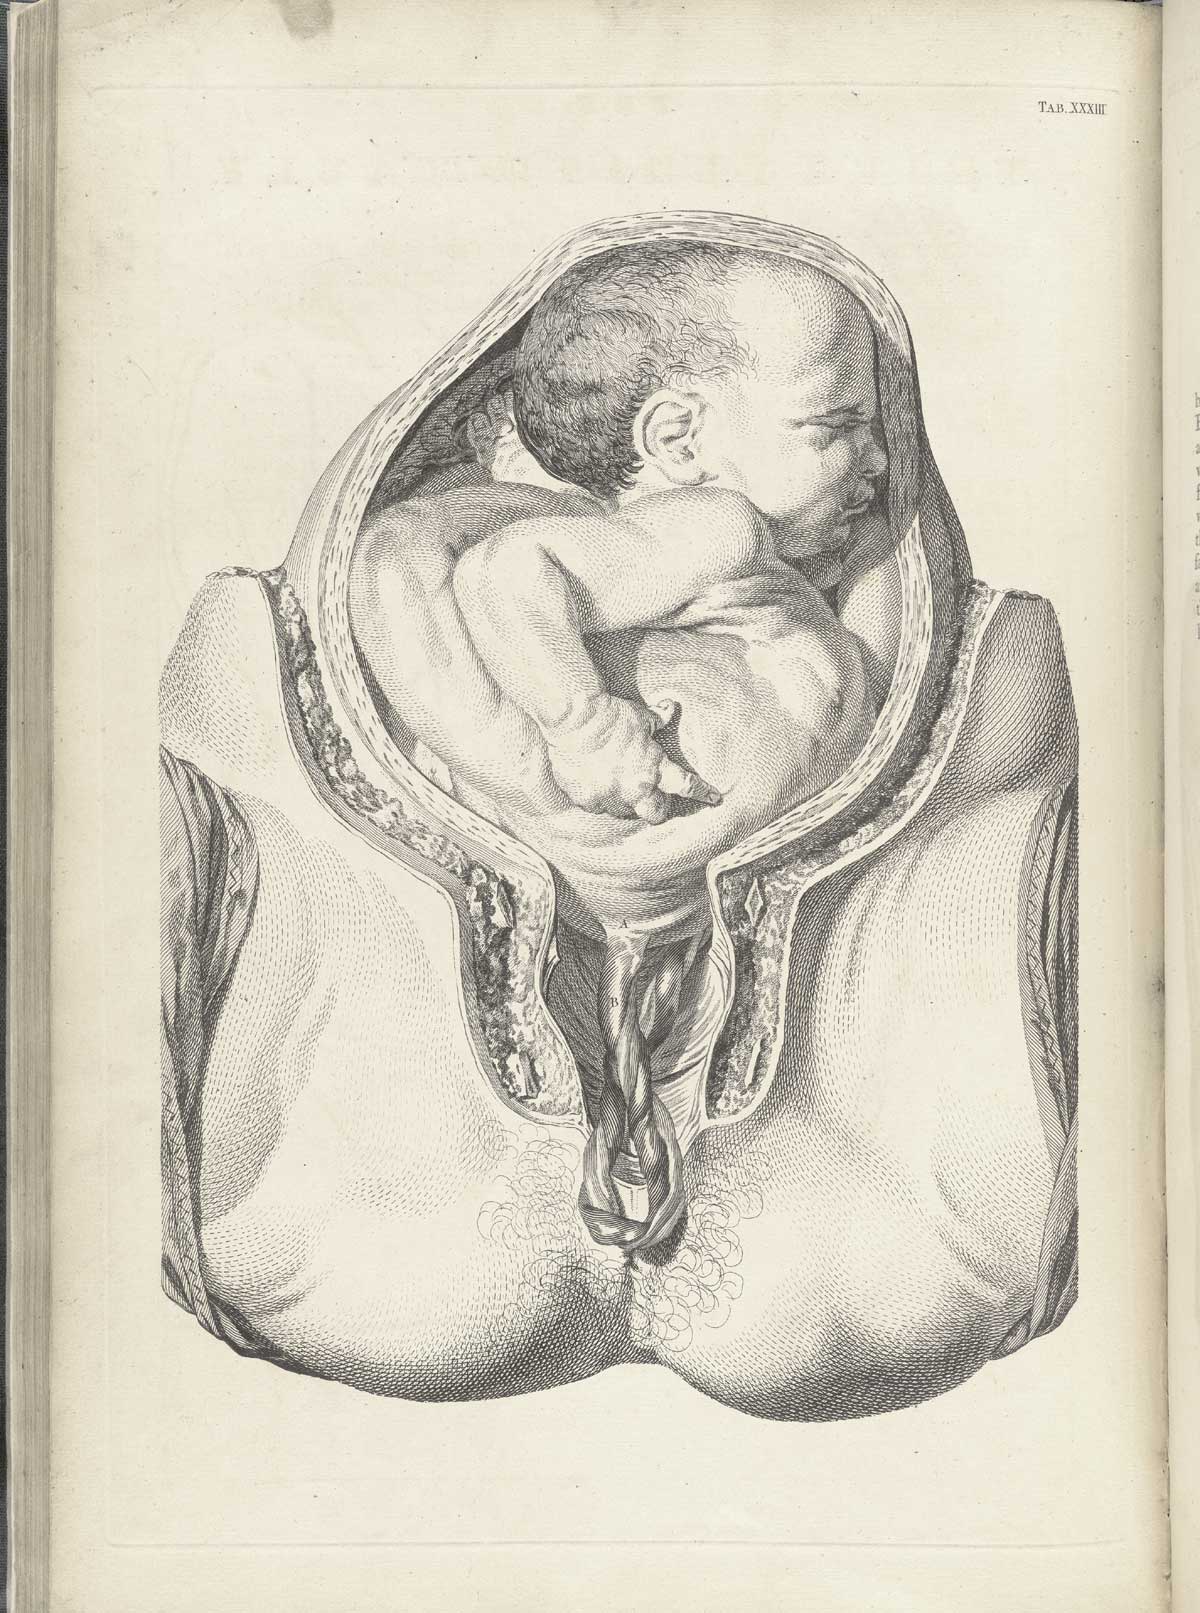 Table 33 of William Smellie's A sett of anatomical tables, with explanations, and an abridgment, of the practice of midwifery, featuring a baby in the uterus stretching backwards, the imbilical cord is in the birth canal.